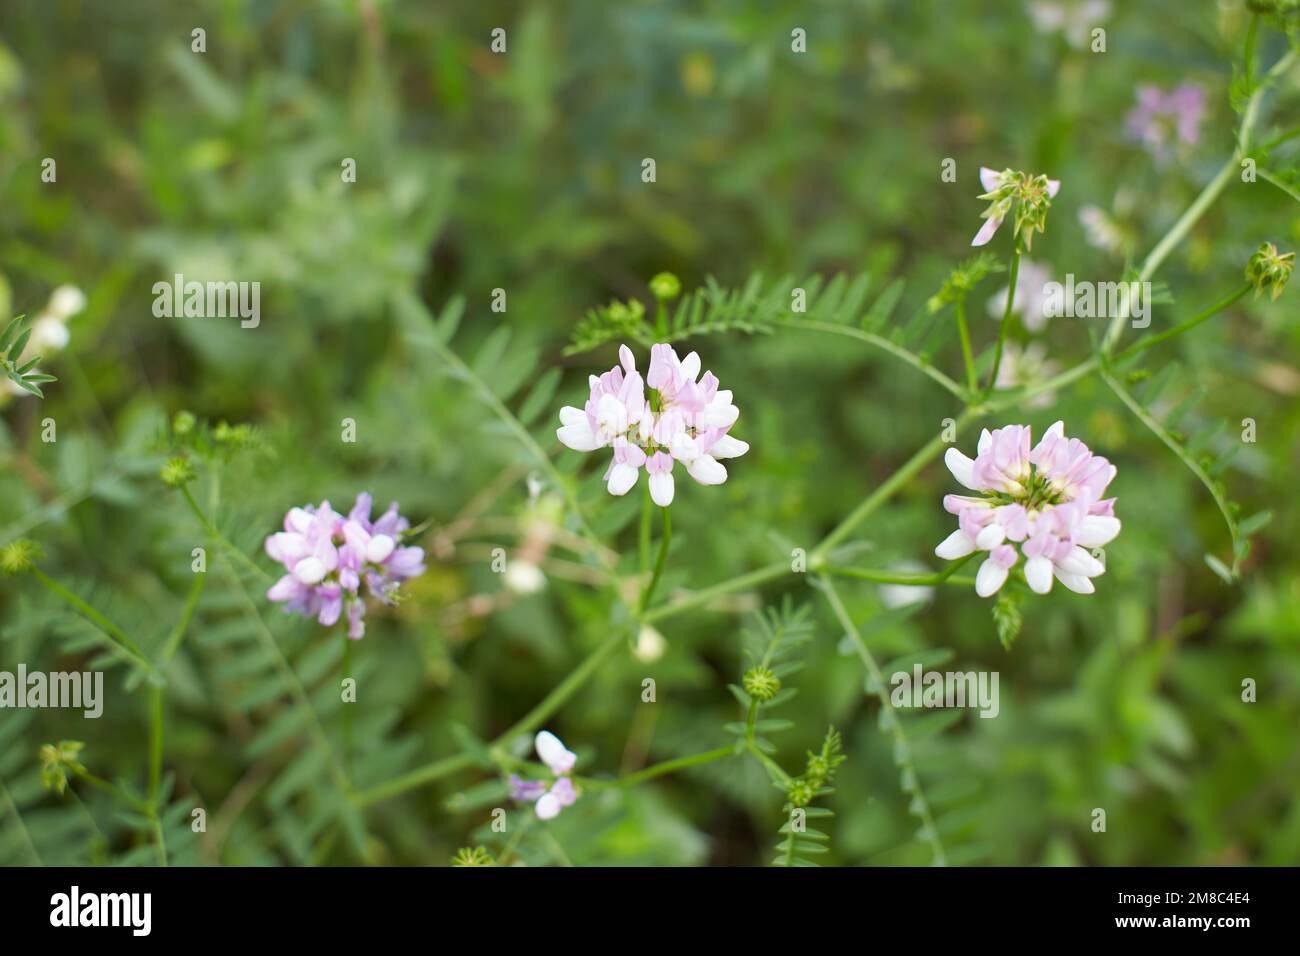 White flowers of Crownvetch in the garden. Summer and spring time. Stock Photo